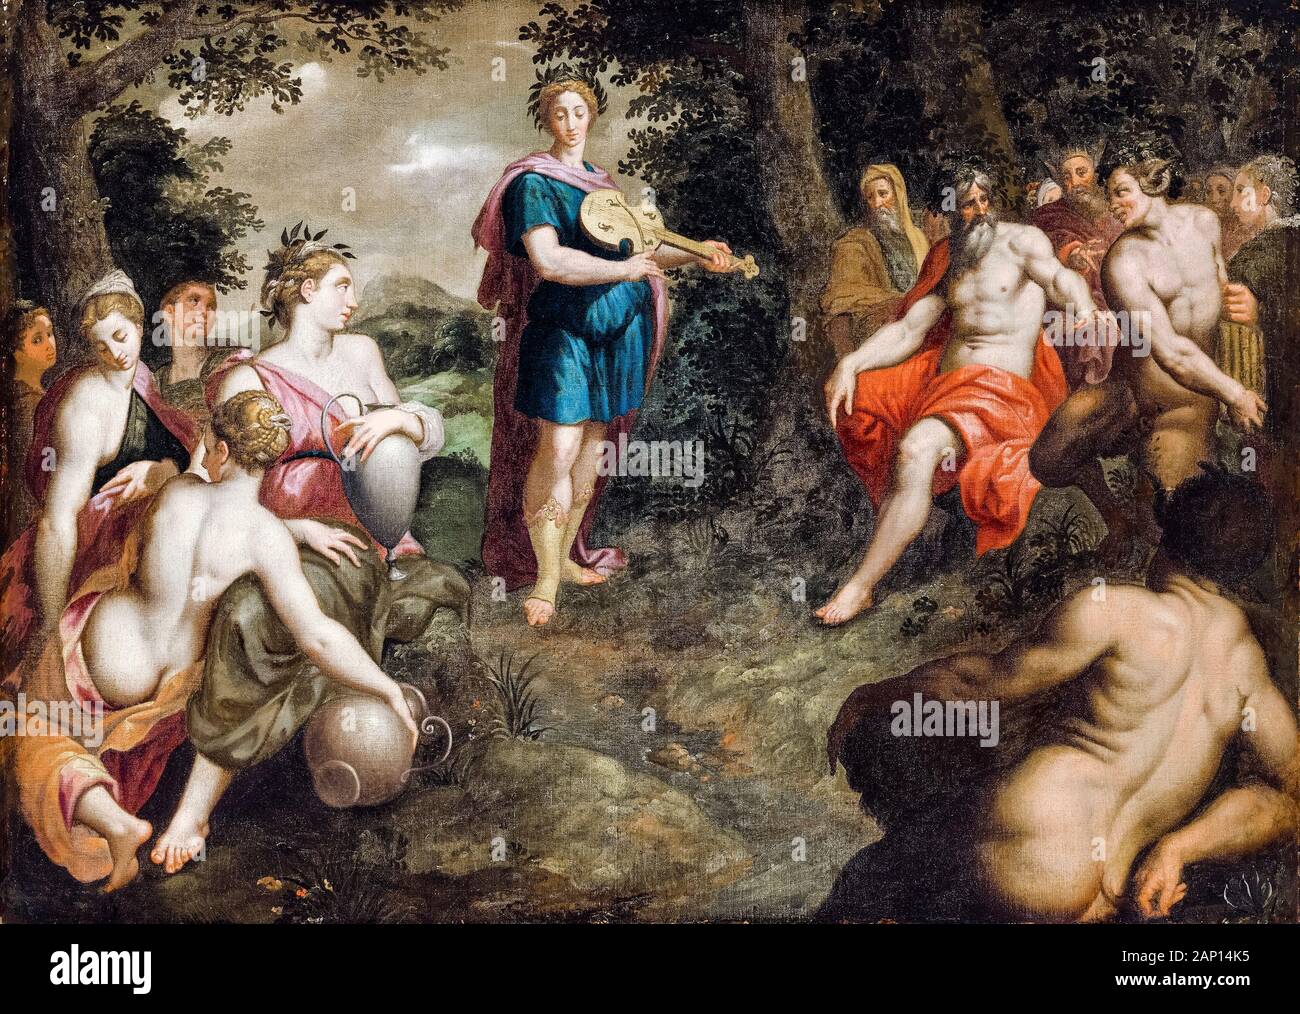 Jacob de Backer, The Contest between Apollo and Pan, (Judgement of Midas), painting, 1560-1590 Stock Photo